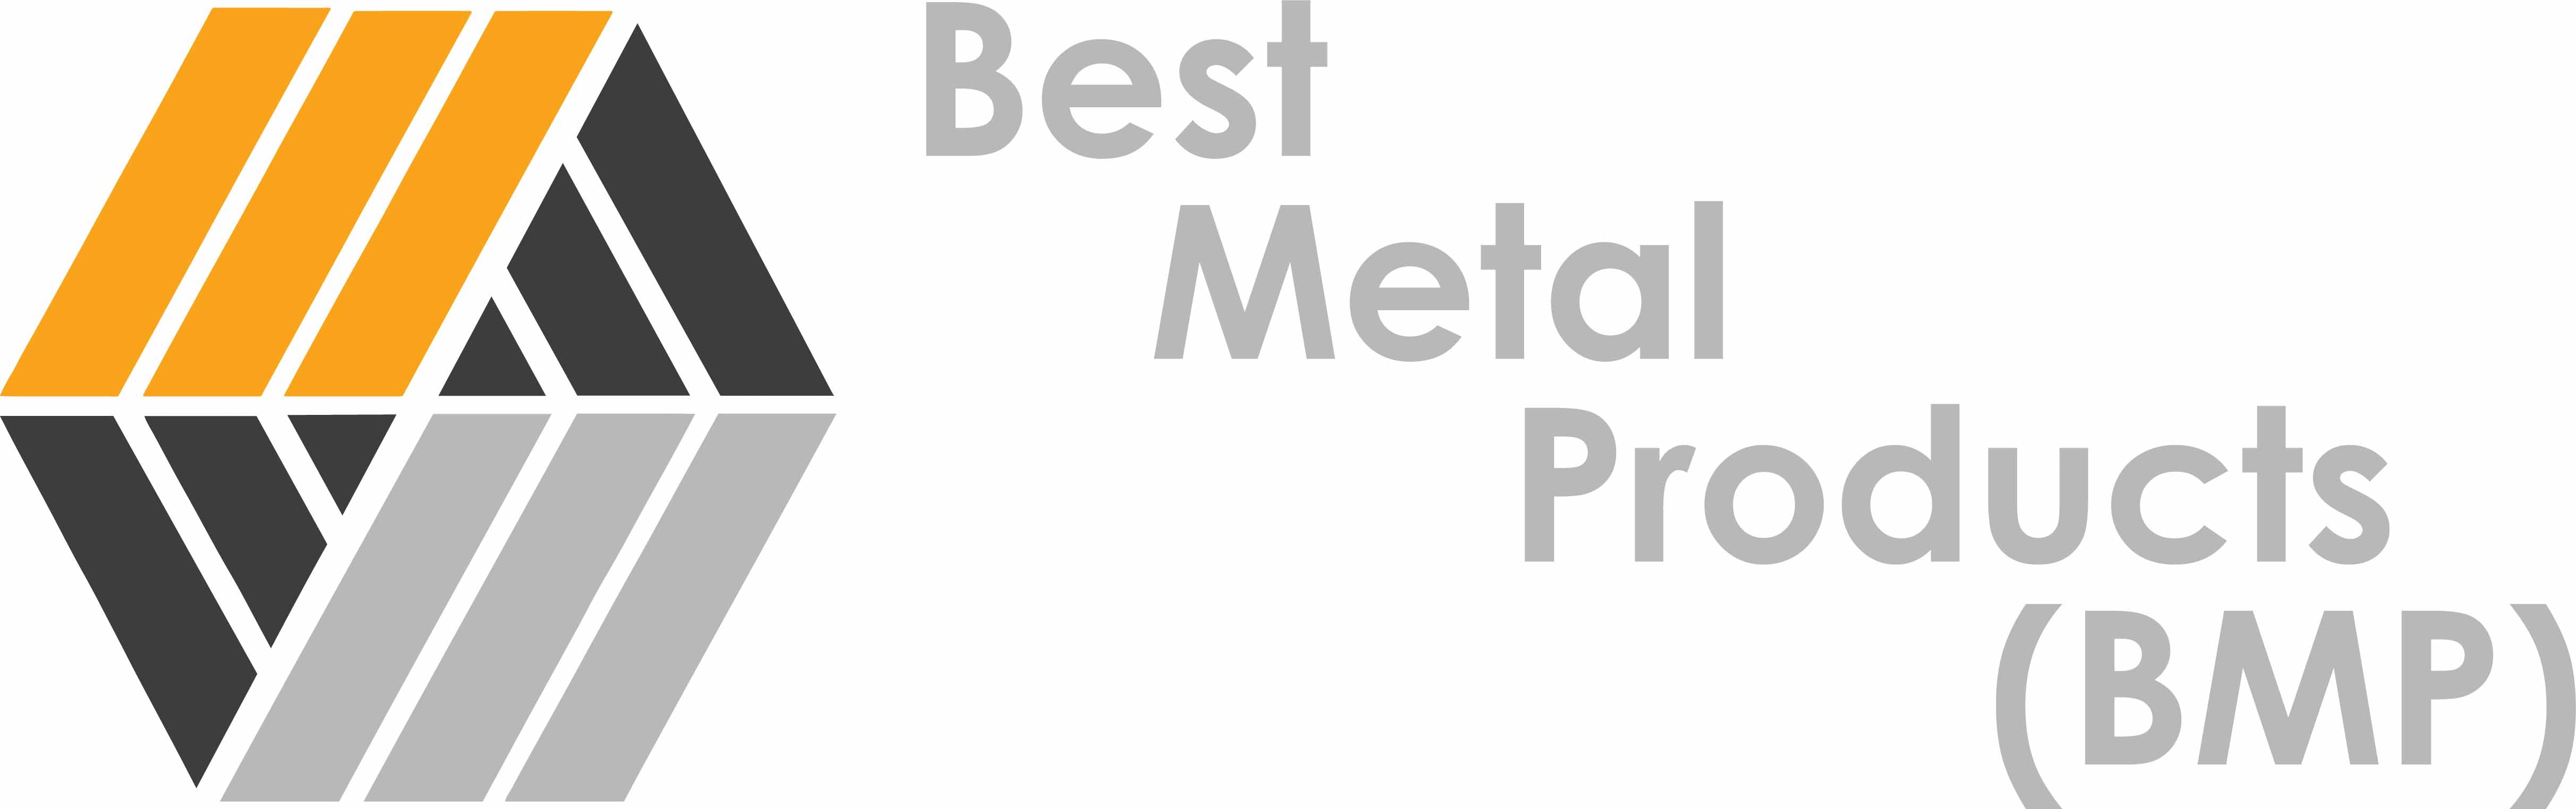 Best Metal Products Corp.